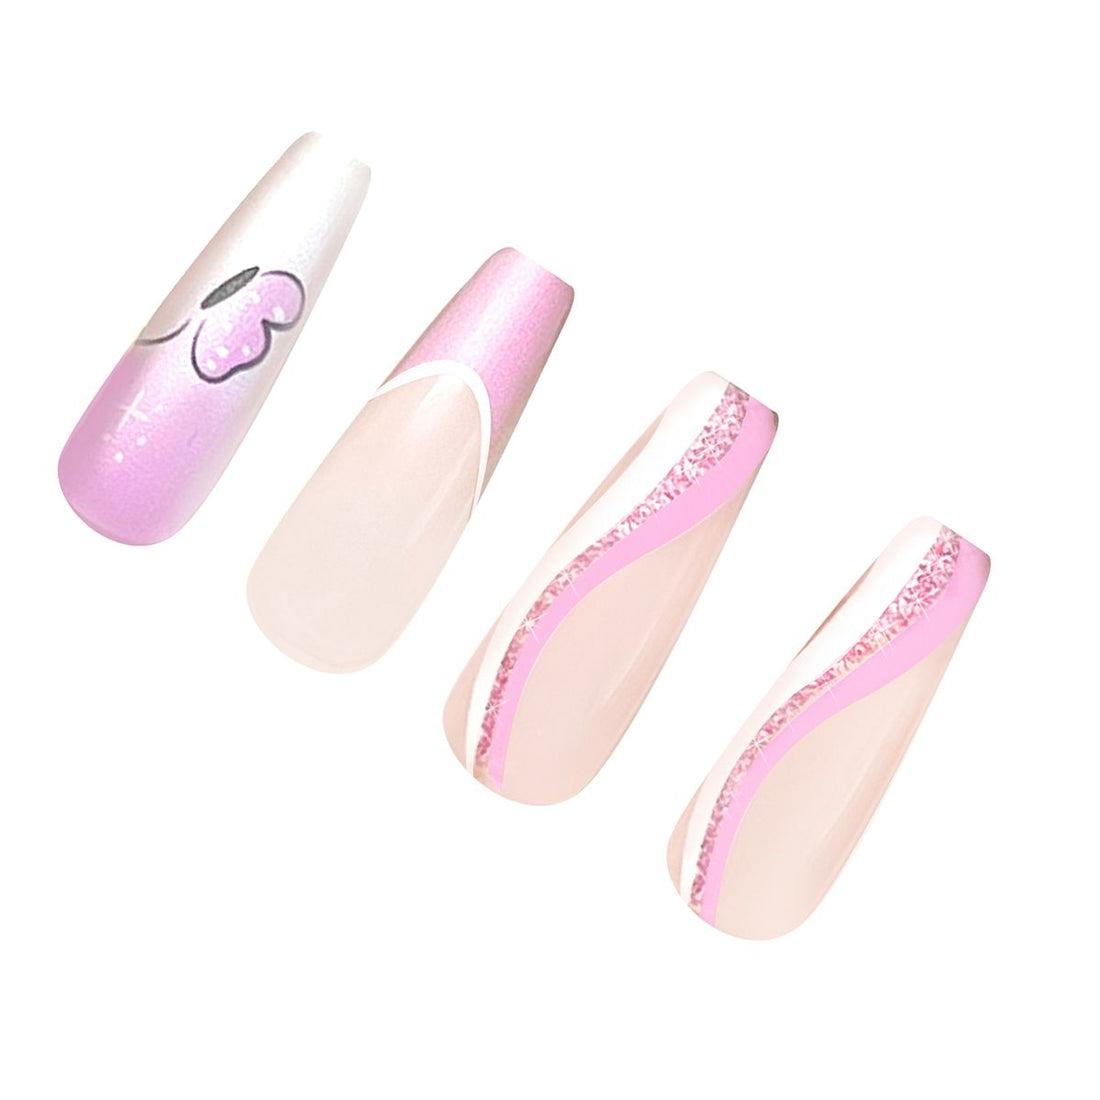 Pink Press On Nails with Glue - Coffin Shaped Nails with butterflies butterfly nails